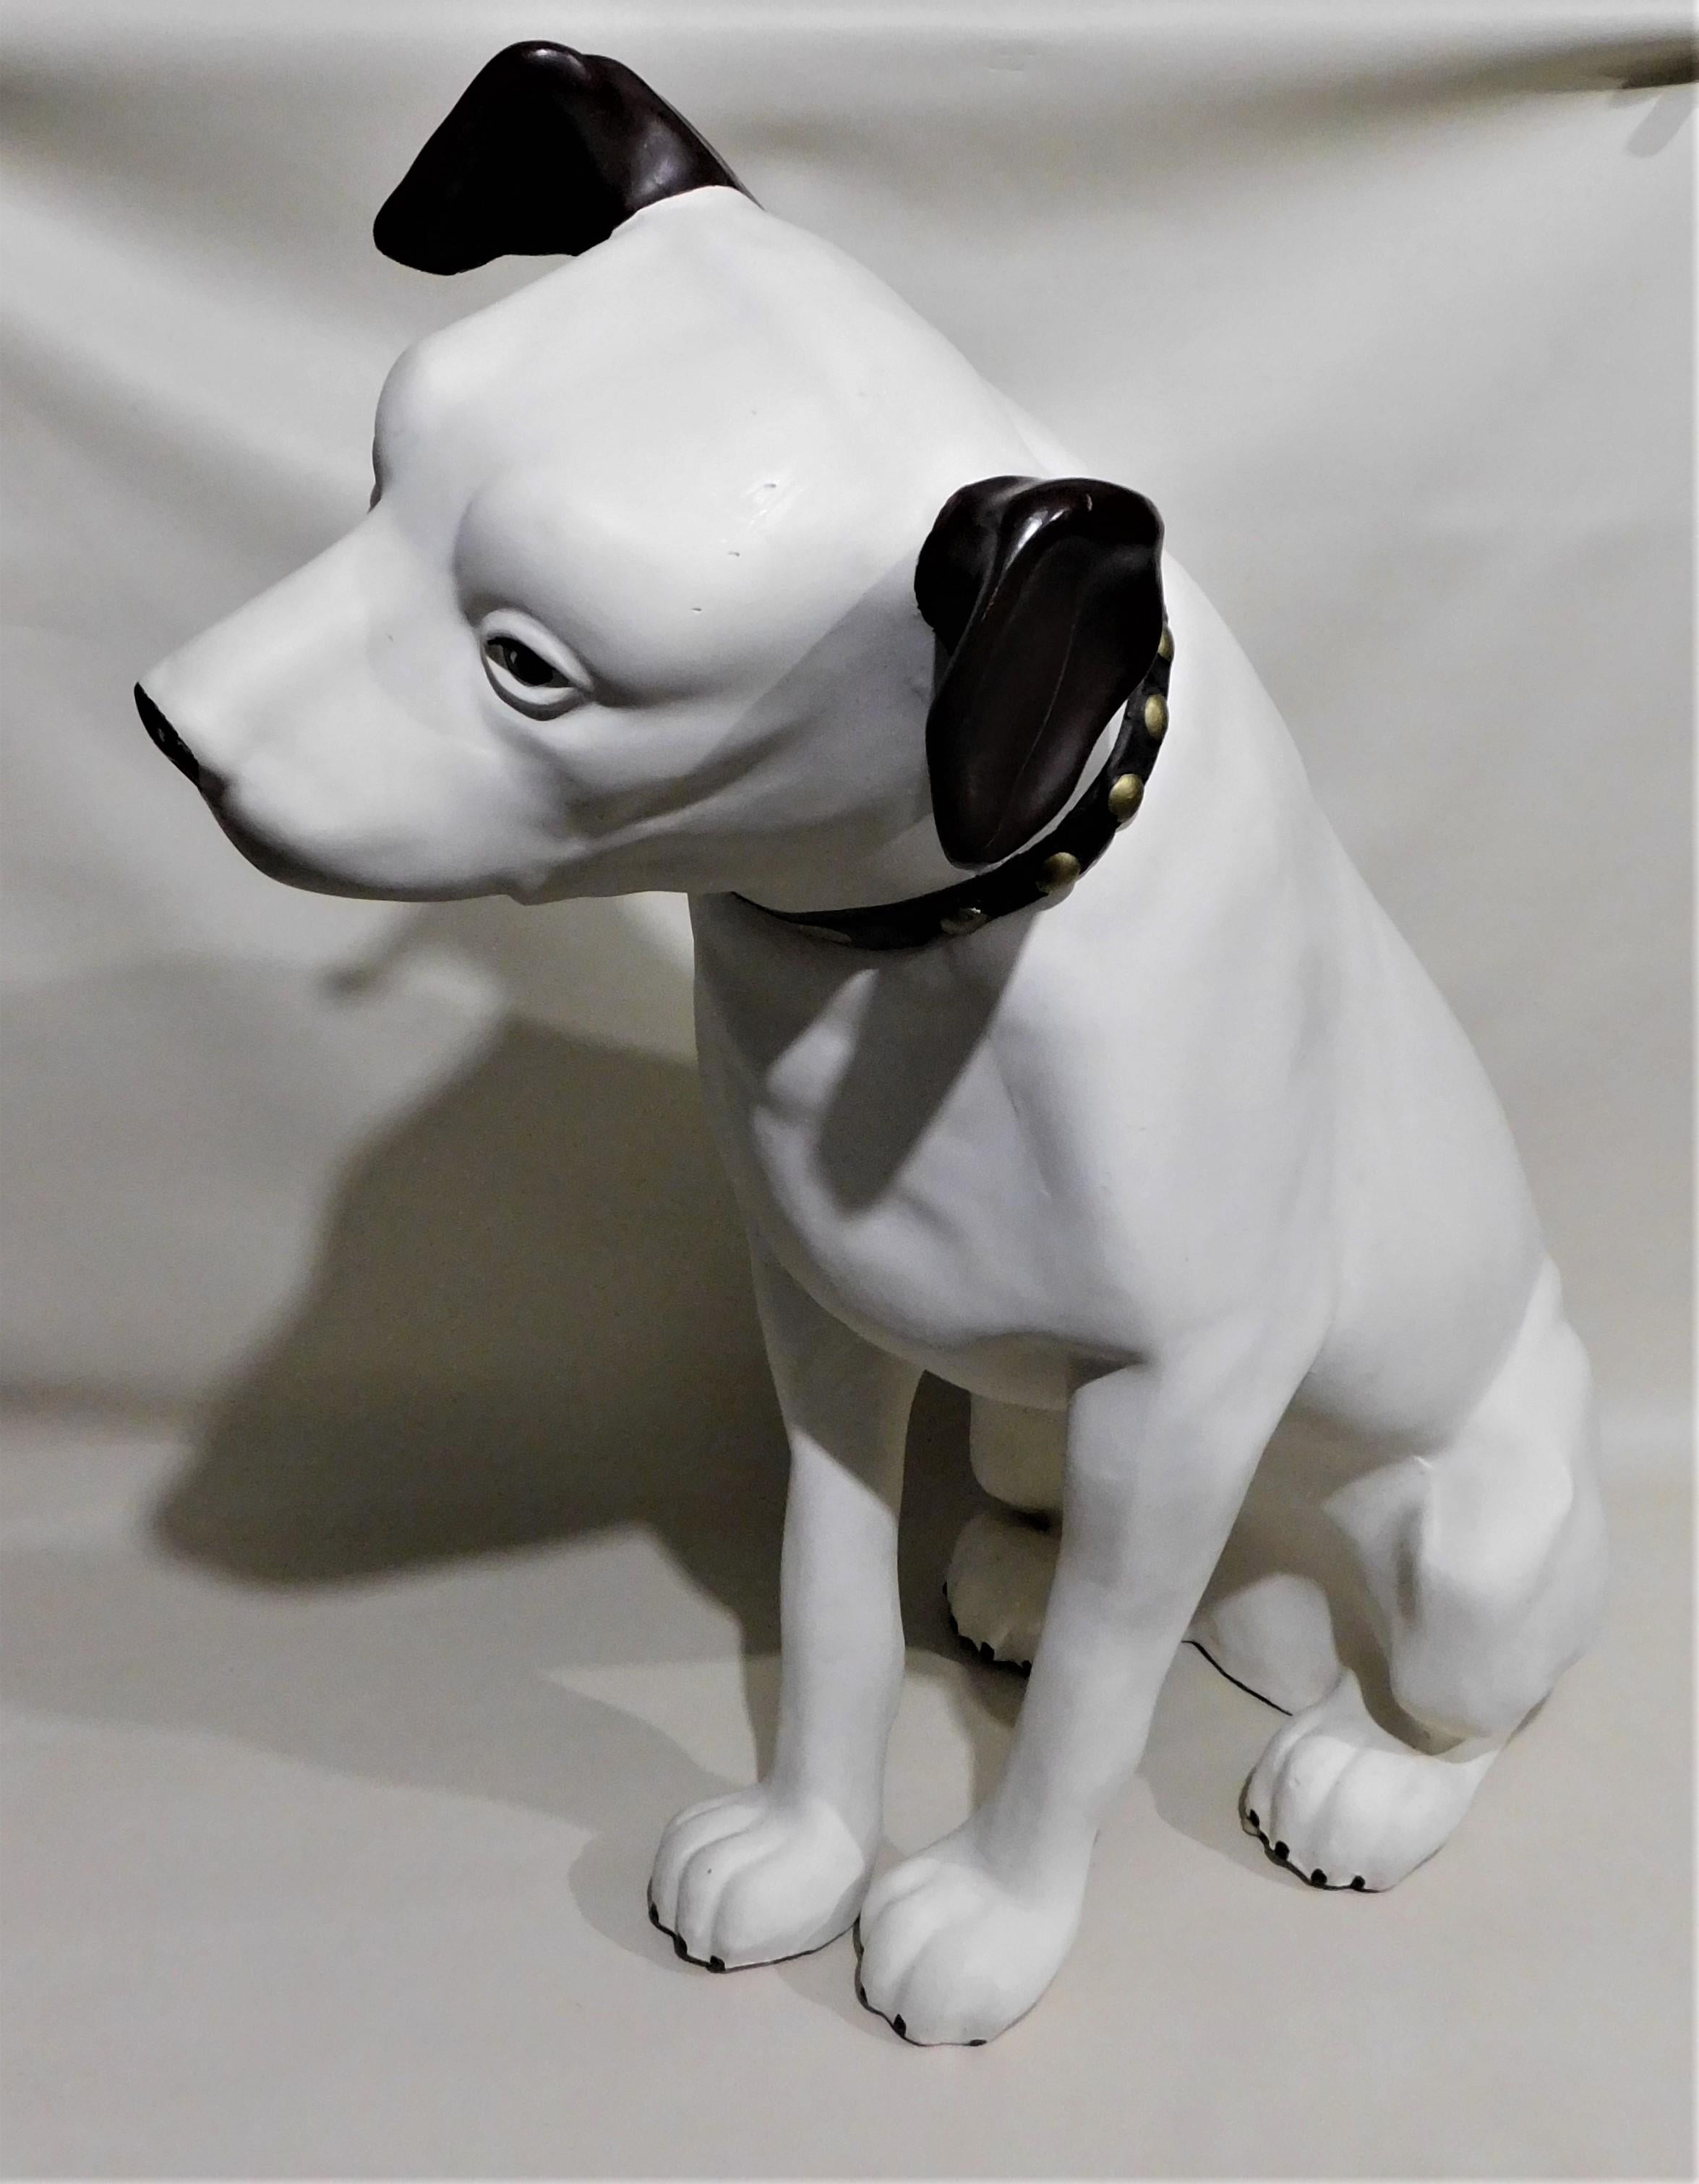 His Masters voice large 34 inch store display 'Nipper' Dog In very good condition, slight crack on one ear see pictures. This is the 3rd generation of Nipper made with plastic or fiberglass.

His Master's Voice (HMV) is a famous trademark in the